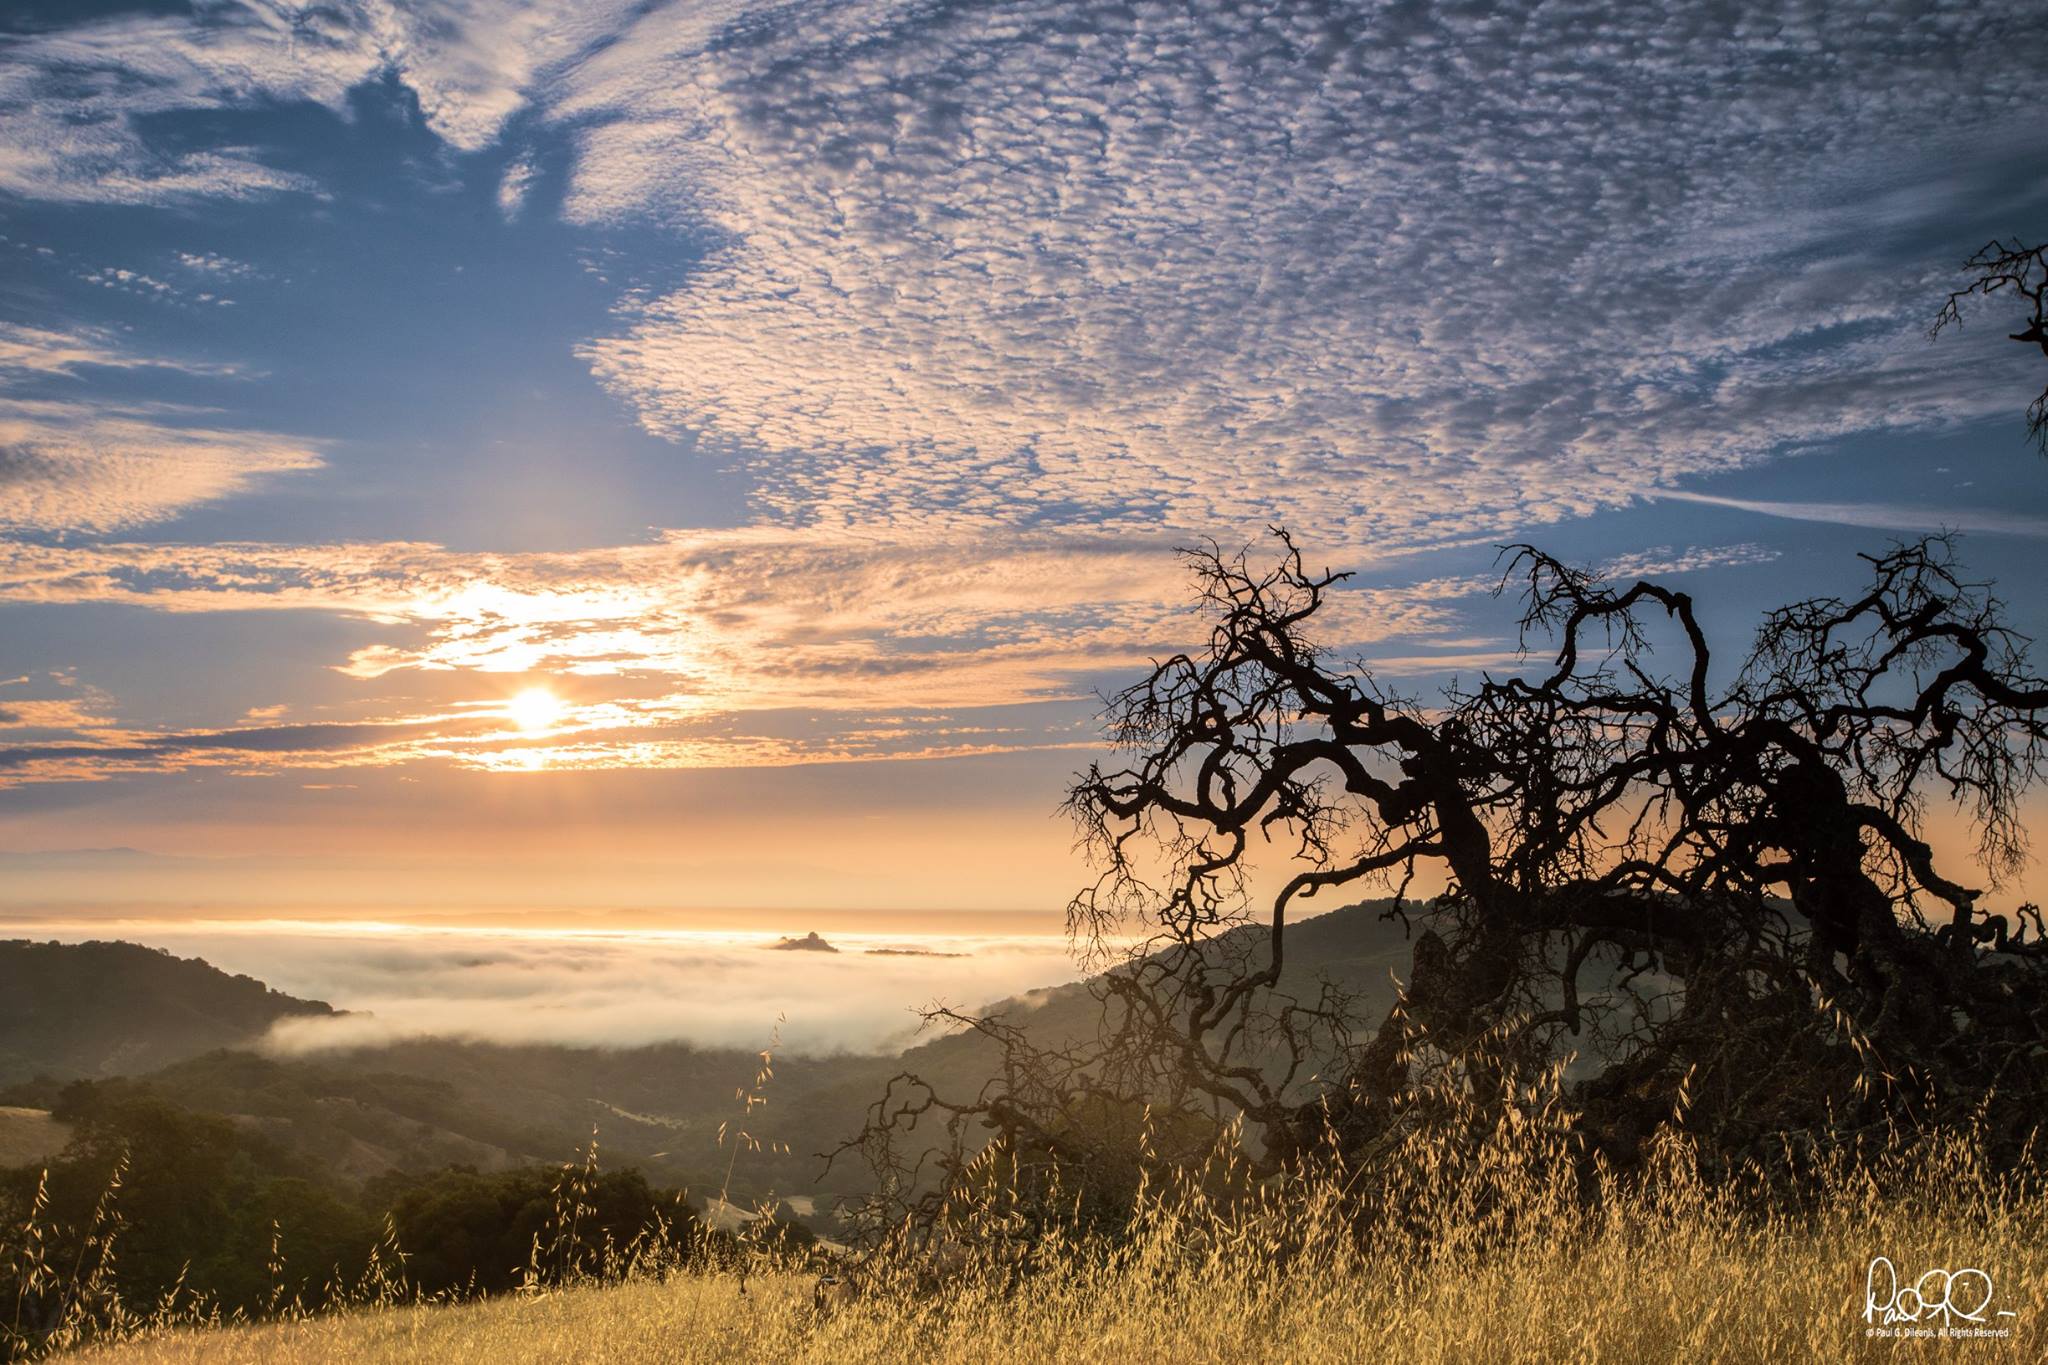 Paul Dileanis - Sunrise from the Mayfair Ranch Trail - Rancho Canada del Oro Open Space Preserve